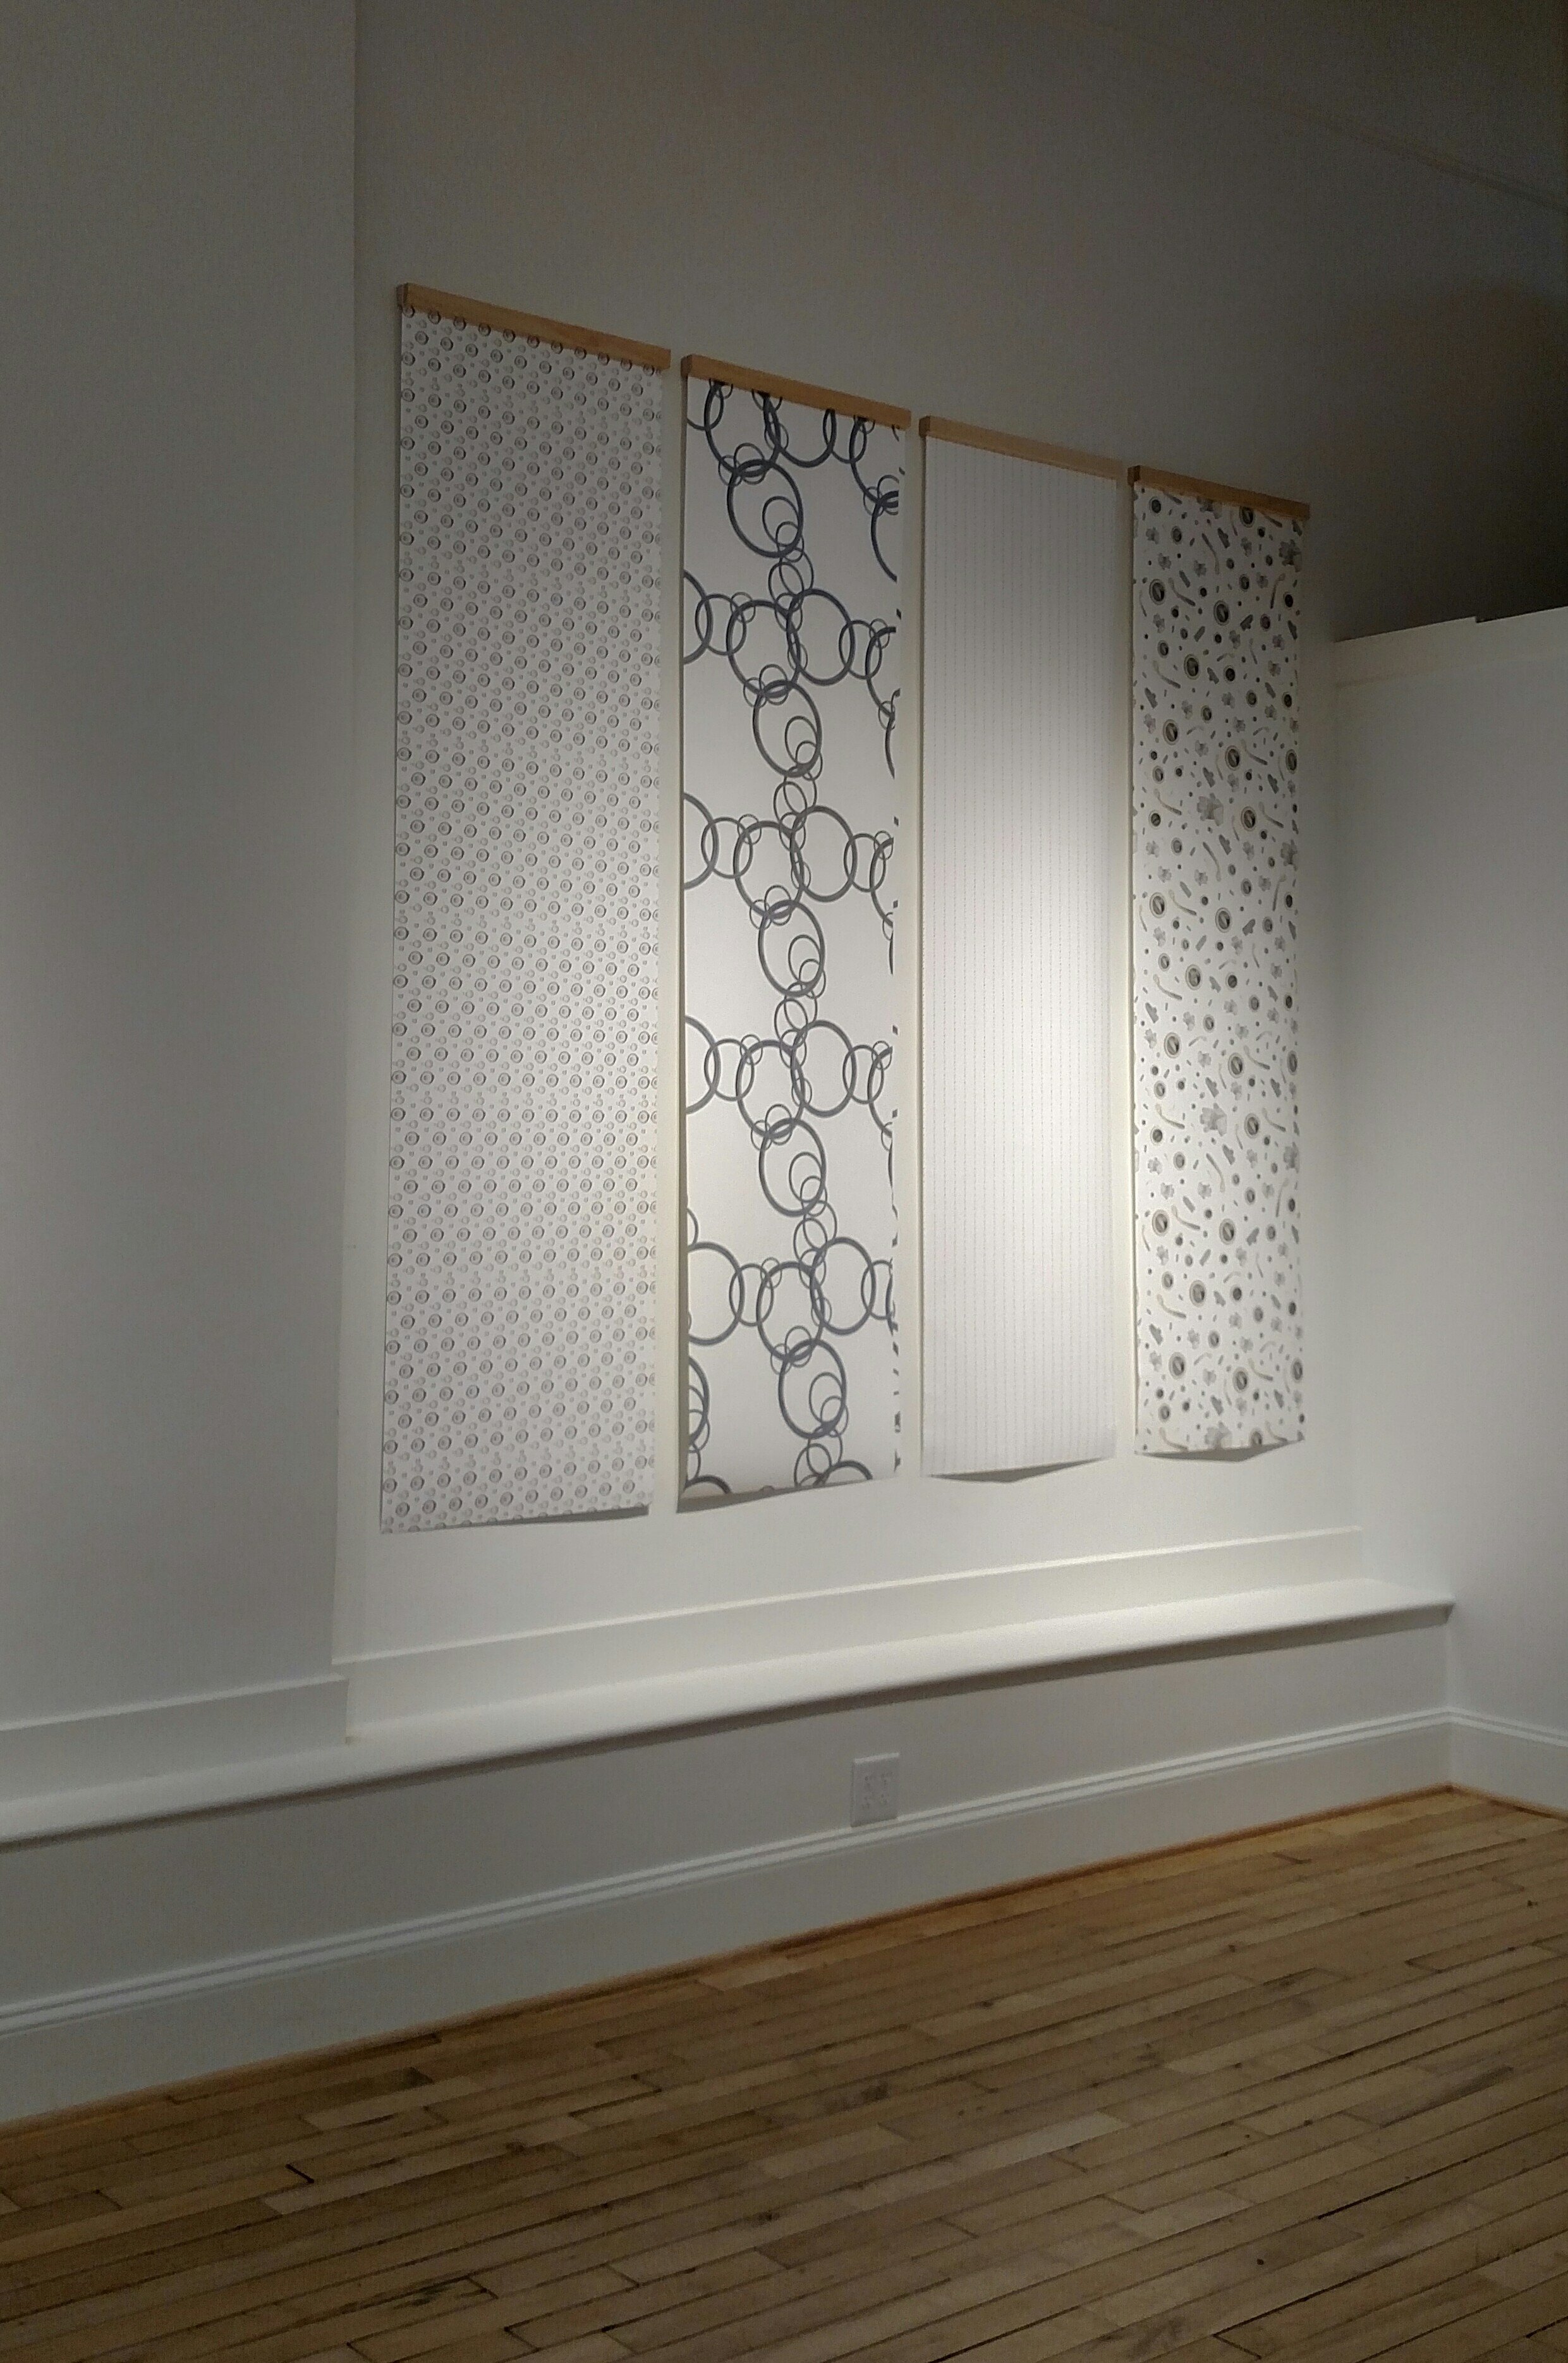 Reproduction(s) Installation: Candela Gallery